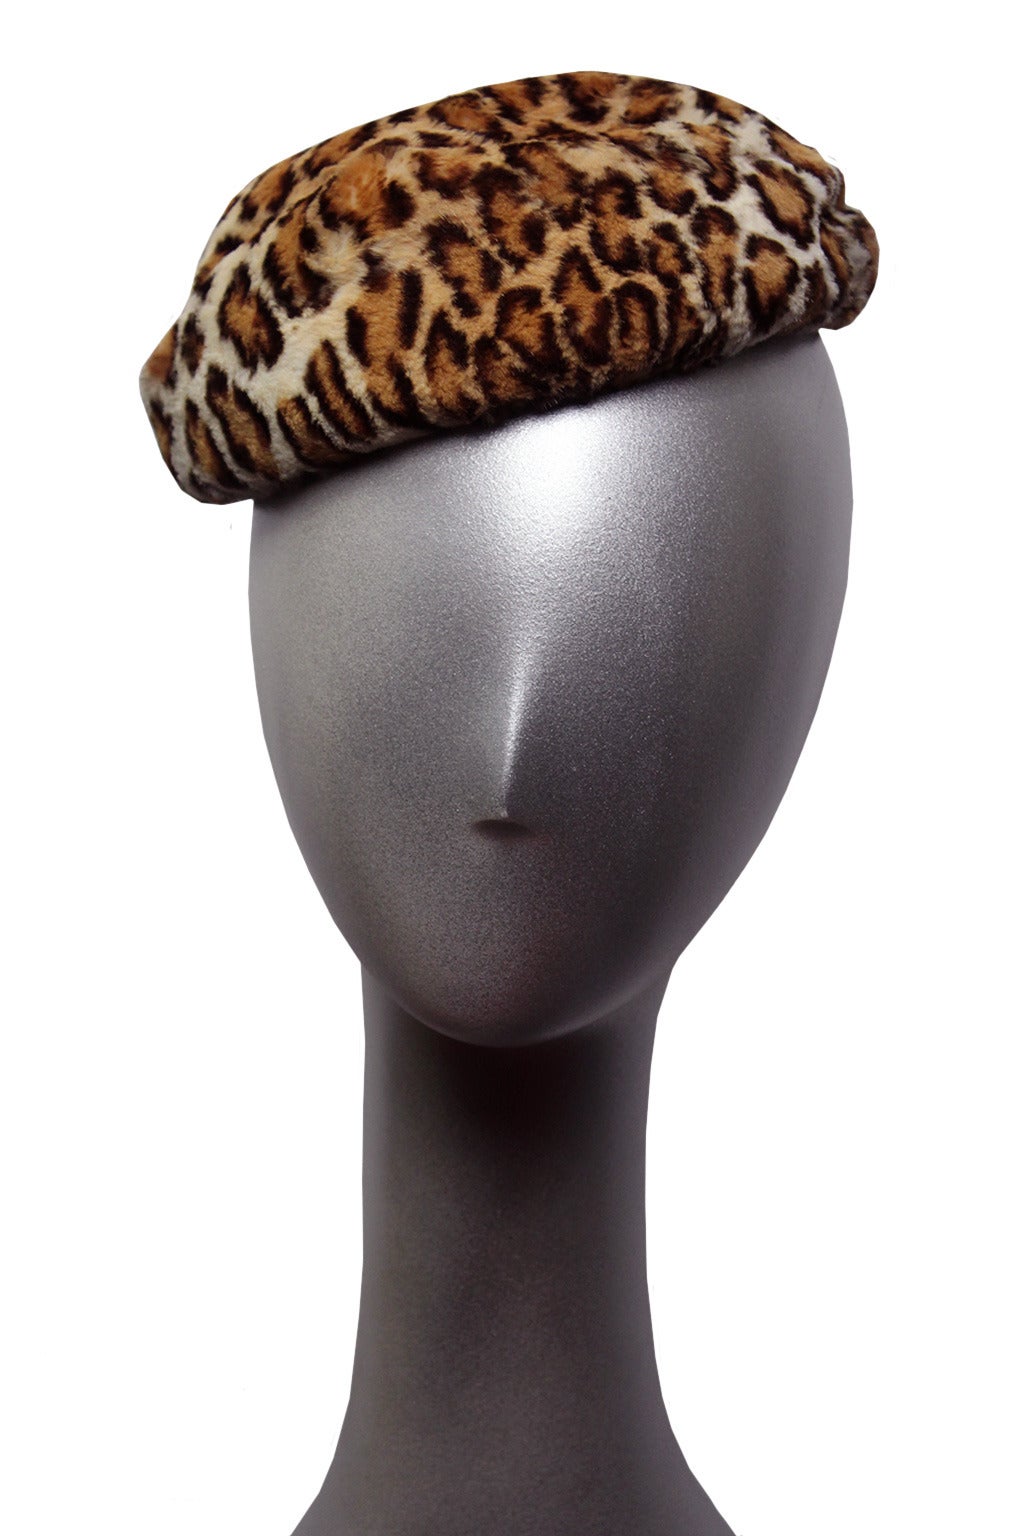 This classic 1940's set includes a hat, long collar and clutch. The extremely soft, short, genuine fur sports an iconic leopard print.  These pieces, worn separately or together, epitomize 1940's glamour.

The clutch is 10.5